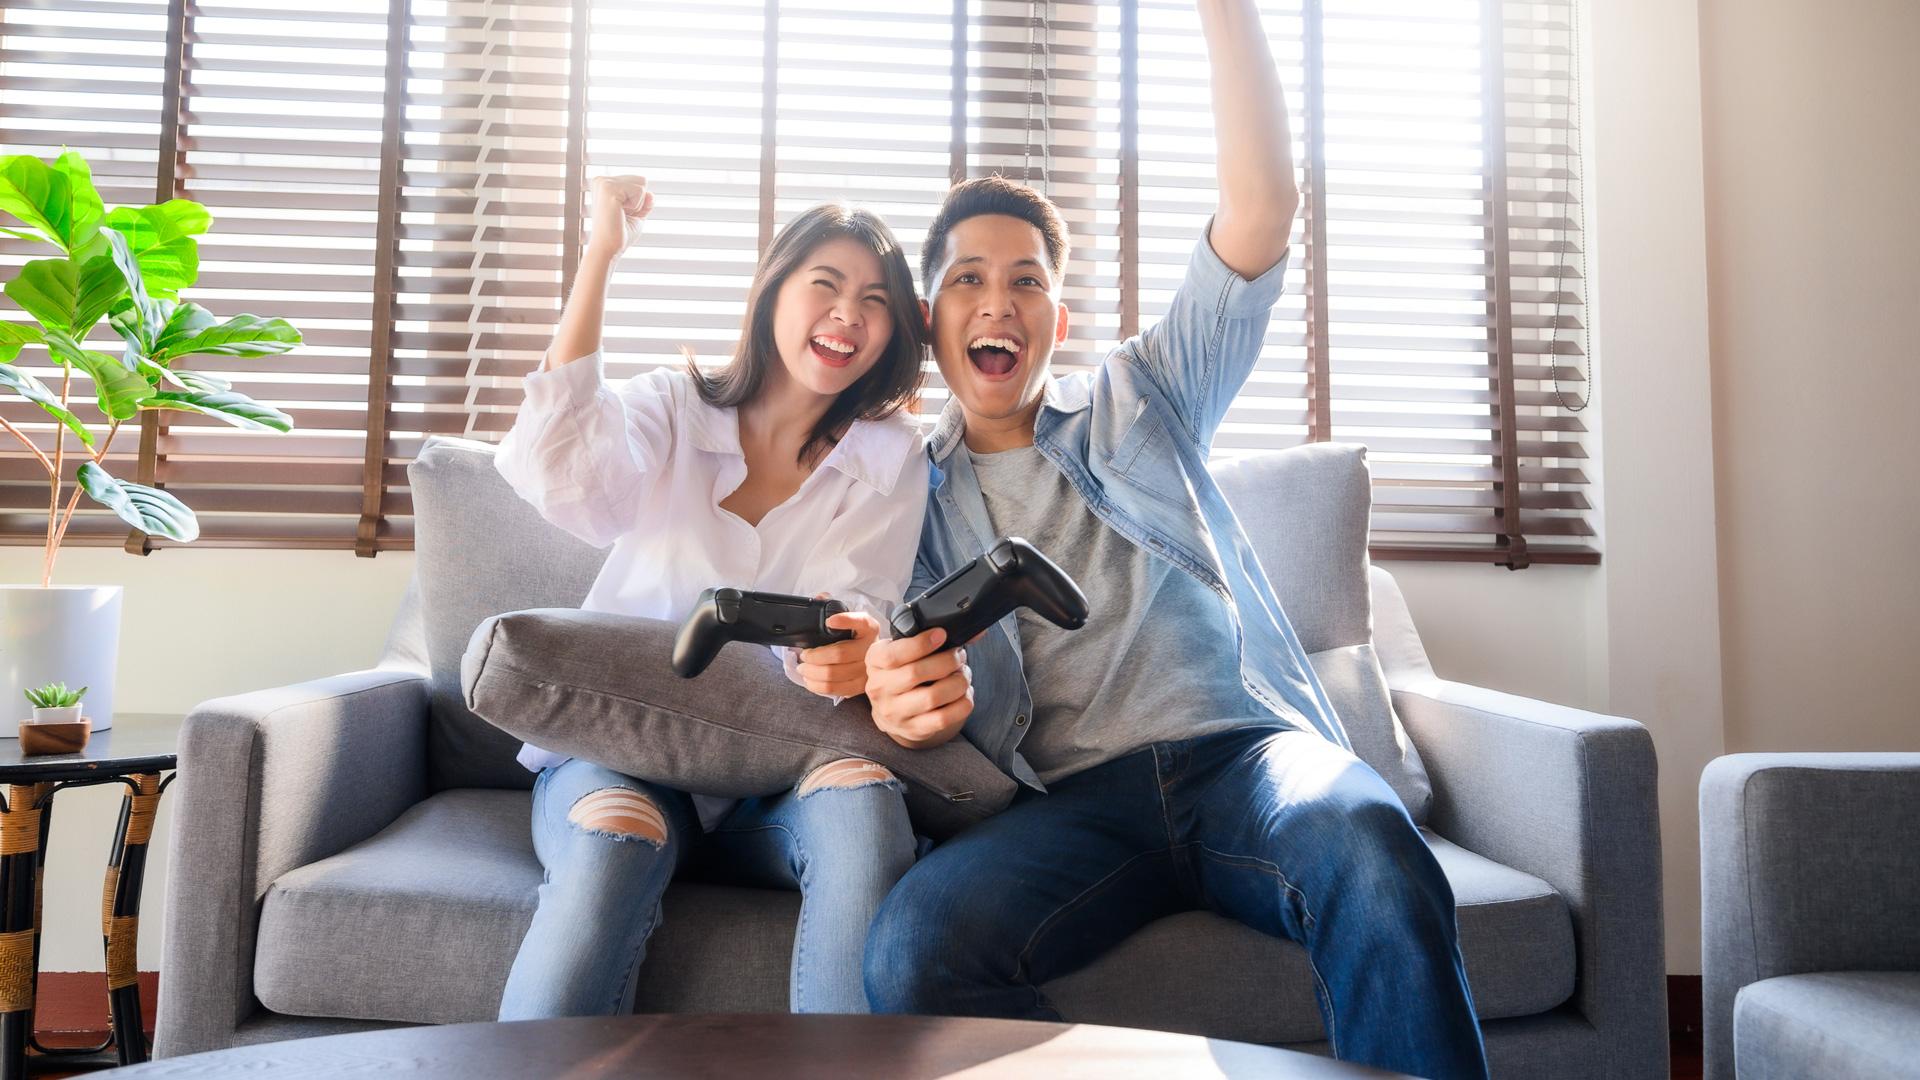 Man and woman sitting on a couch, both holding a controller and raising their arms in celebration.